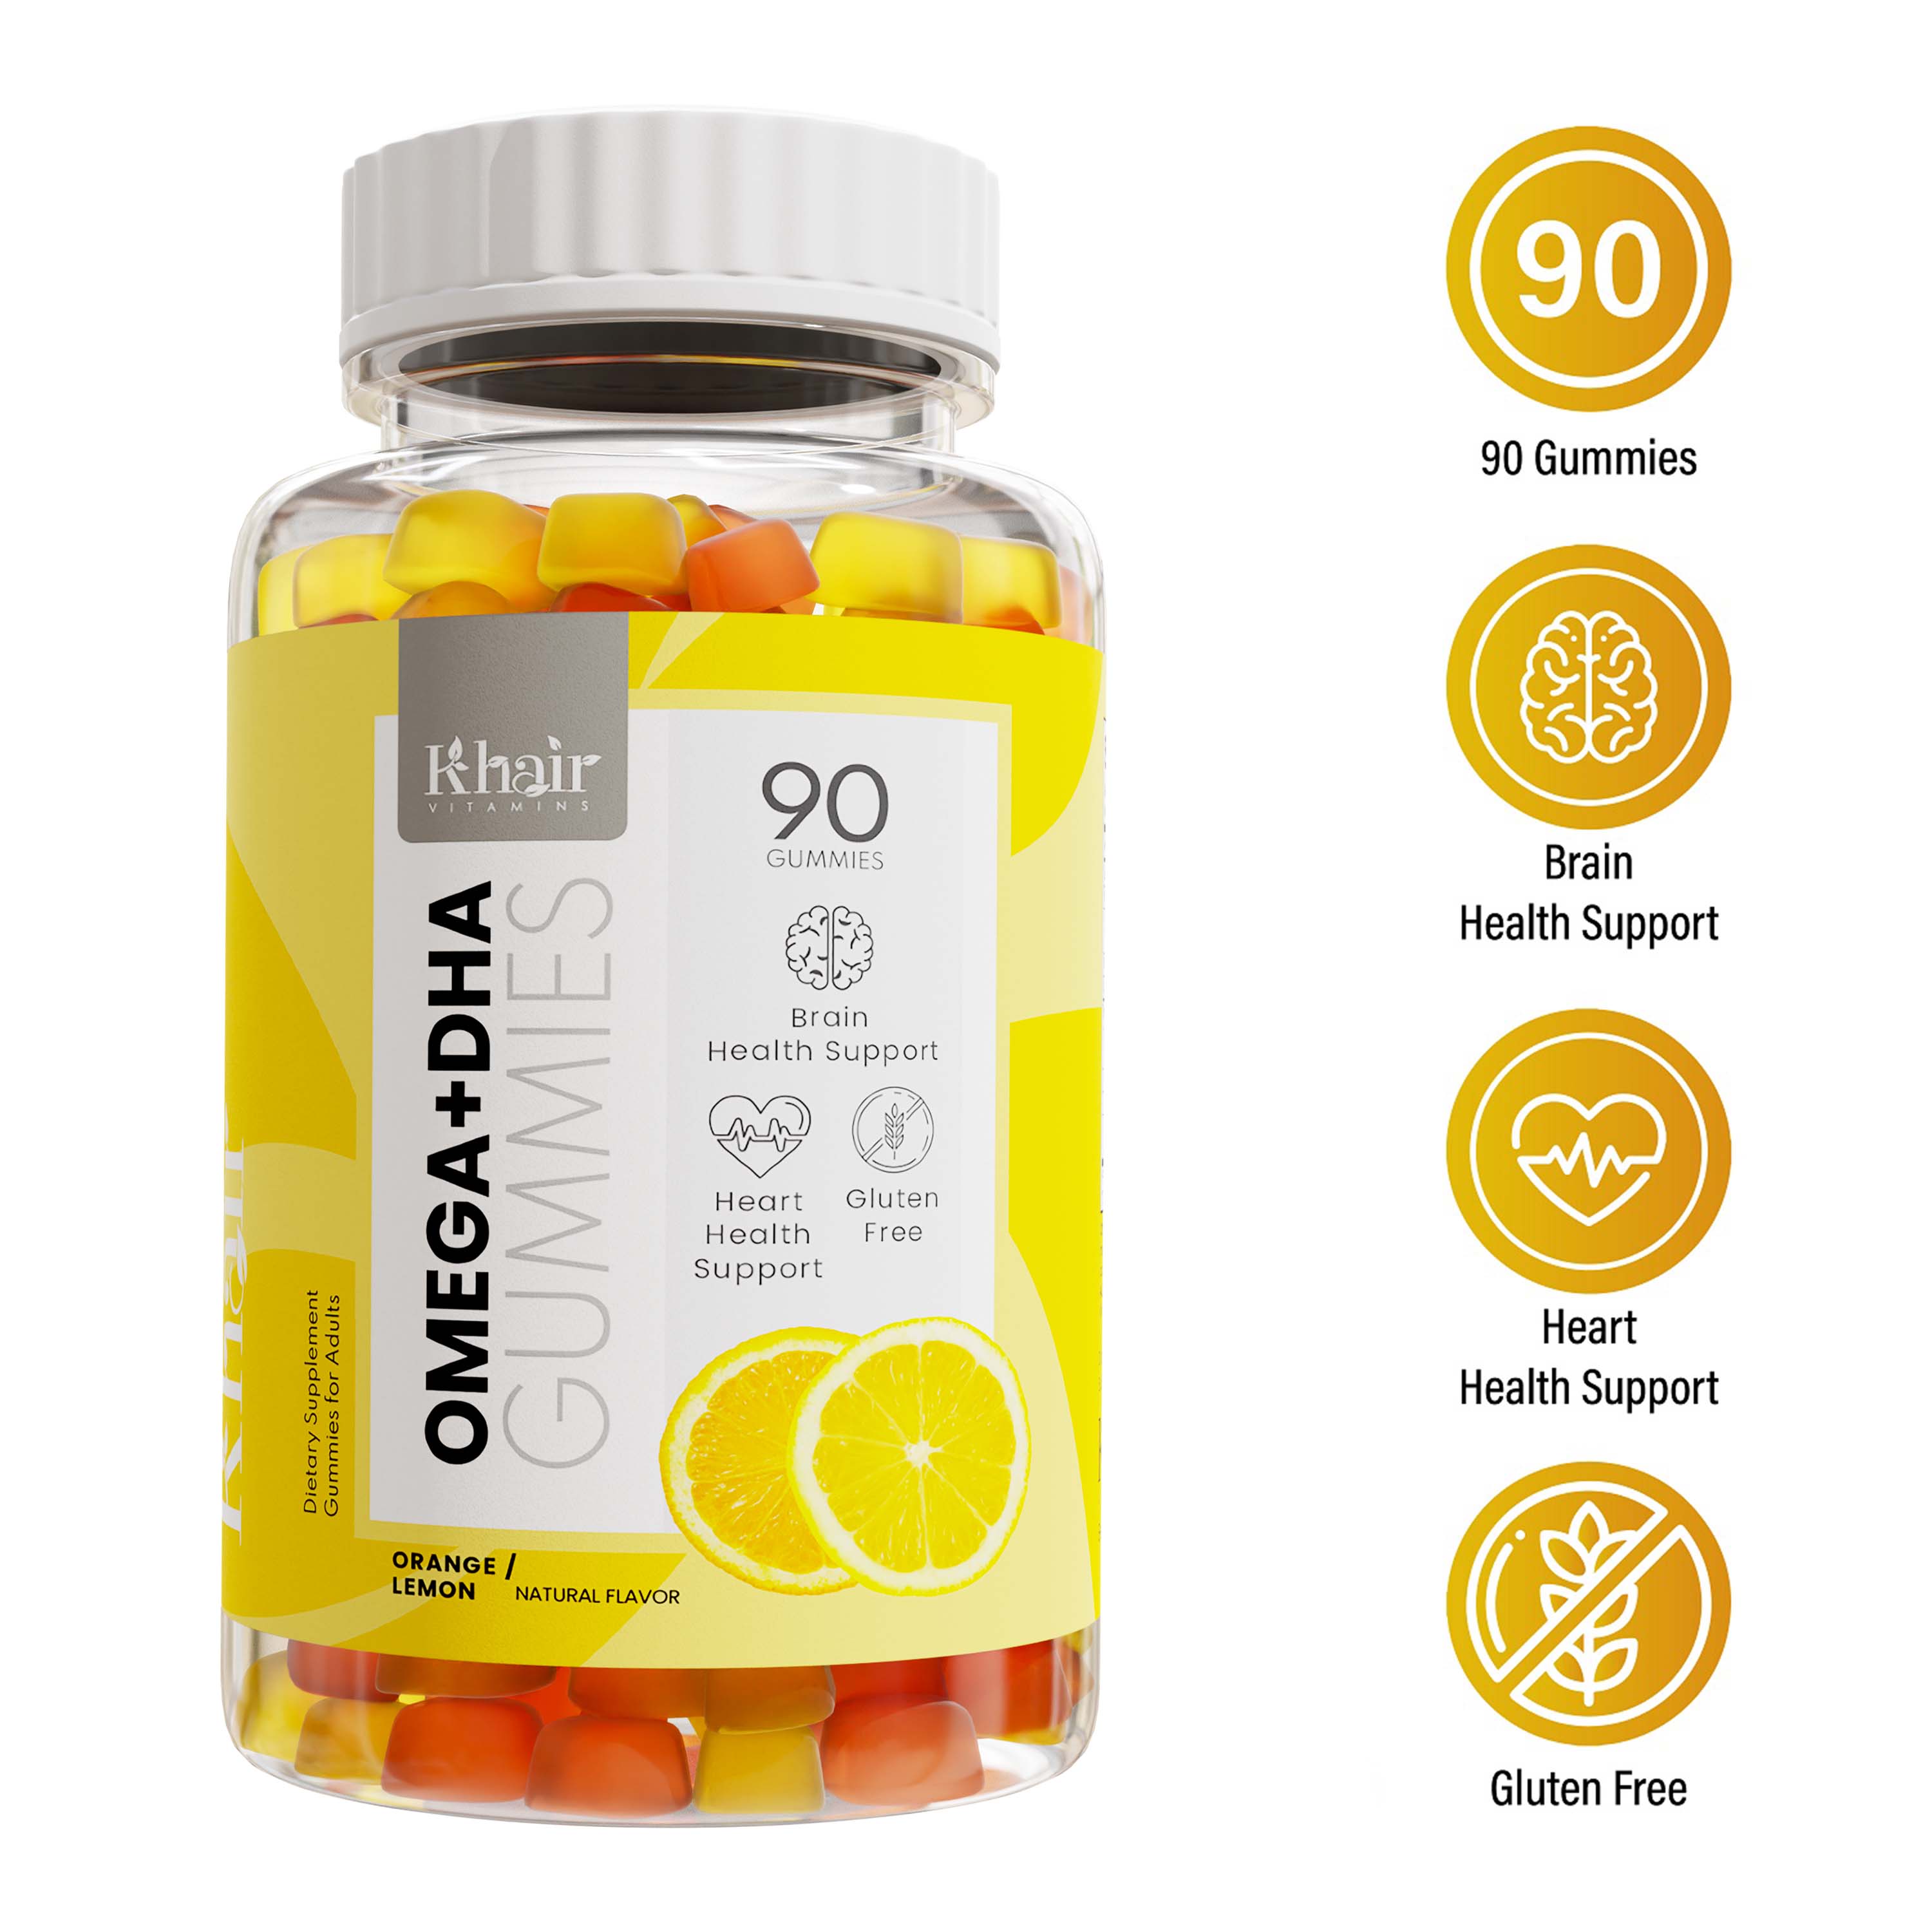 A bottle of Khair Omega + DHA Gummies featuring 90 gummies for brain and heart health support, labeled as gluten-free, in orange and lemon natural flavors.